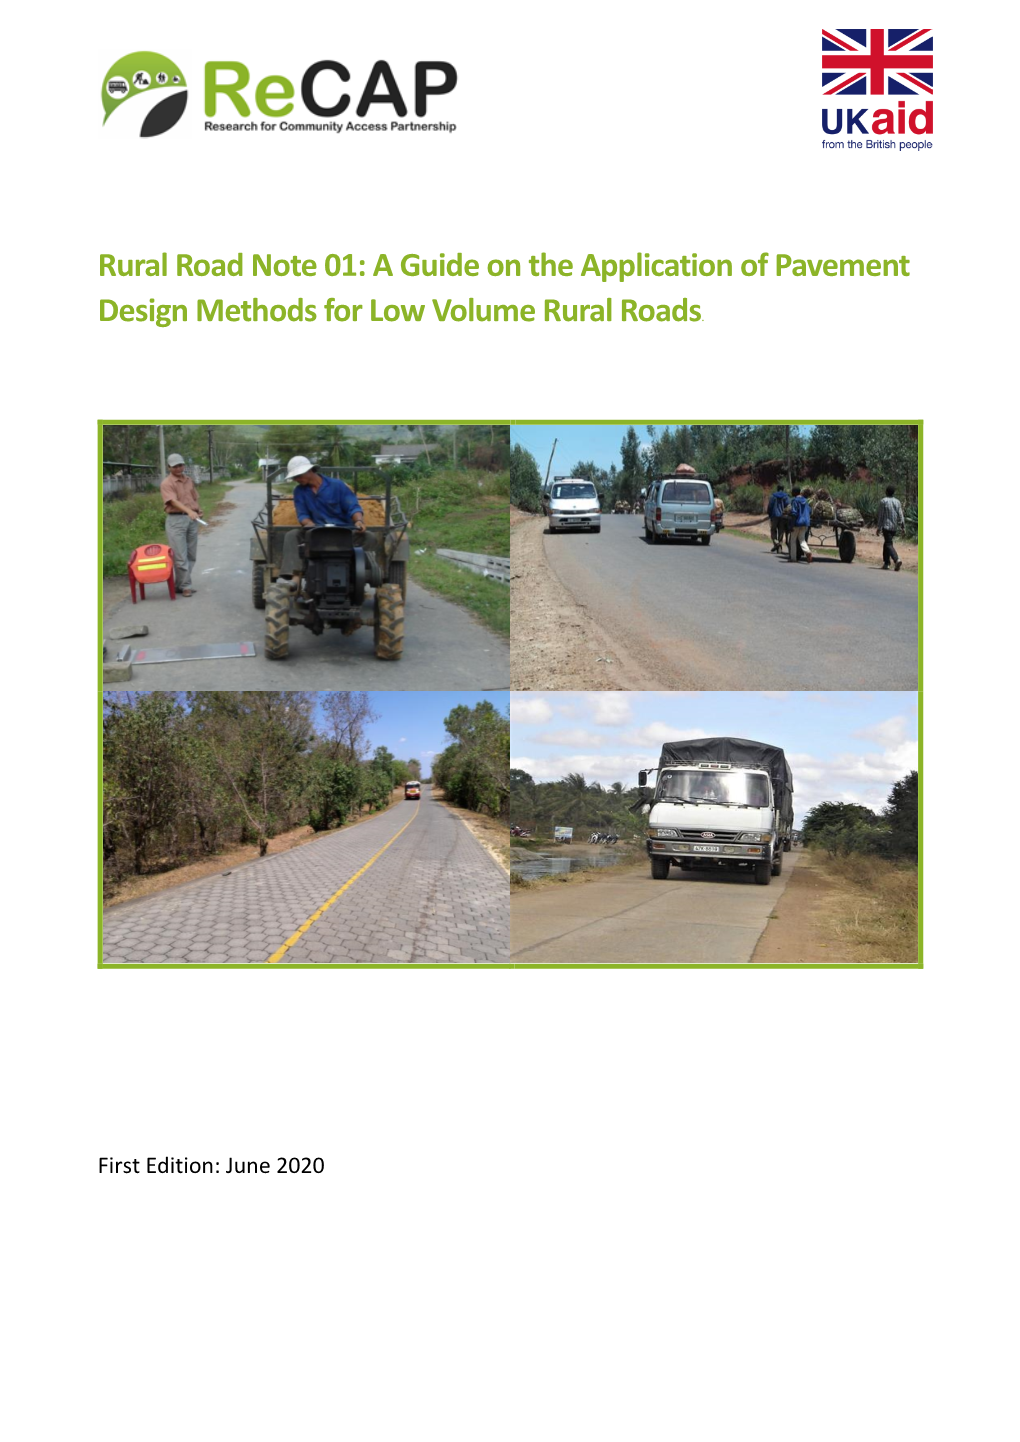 Rural Road Note 01: a Guide on the Application of Pavement Design Methods for Low Volume Rural Roads, First Edition